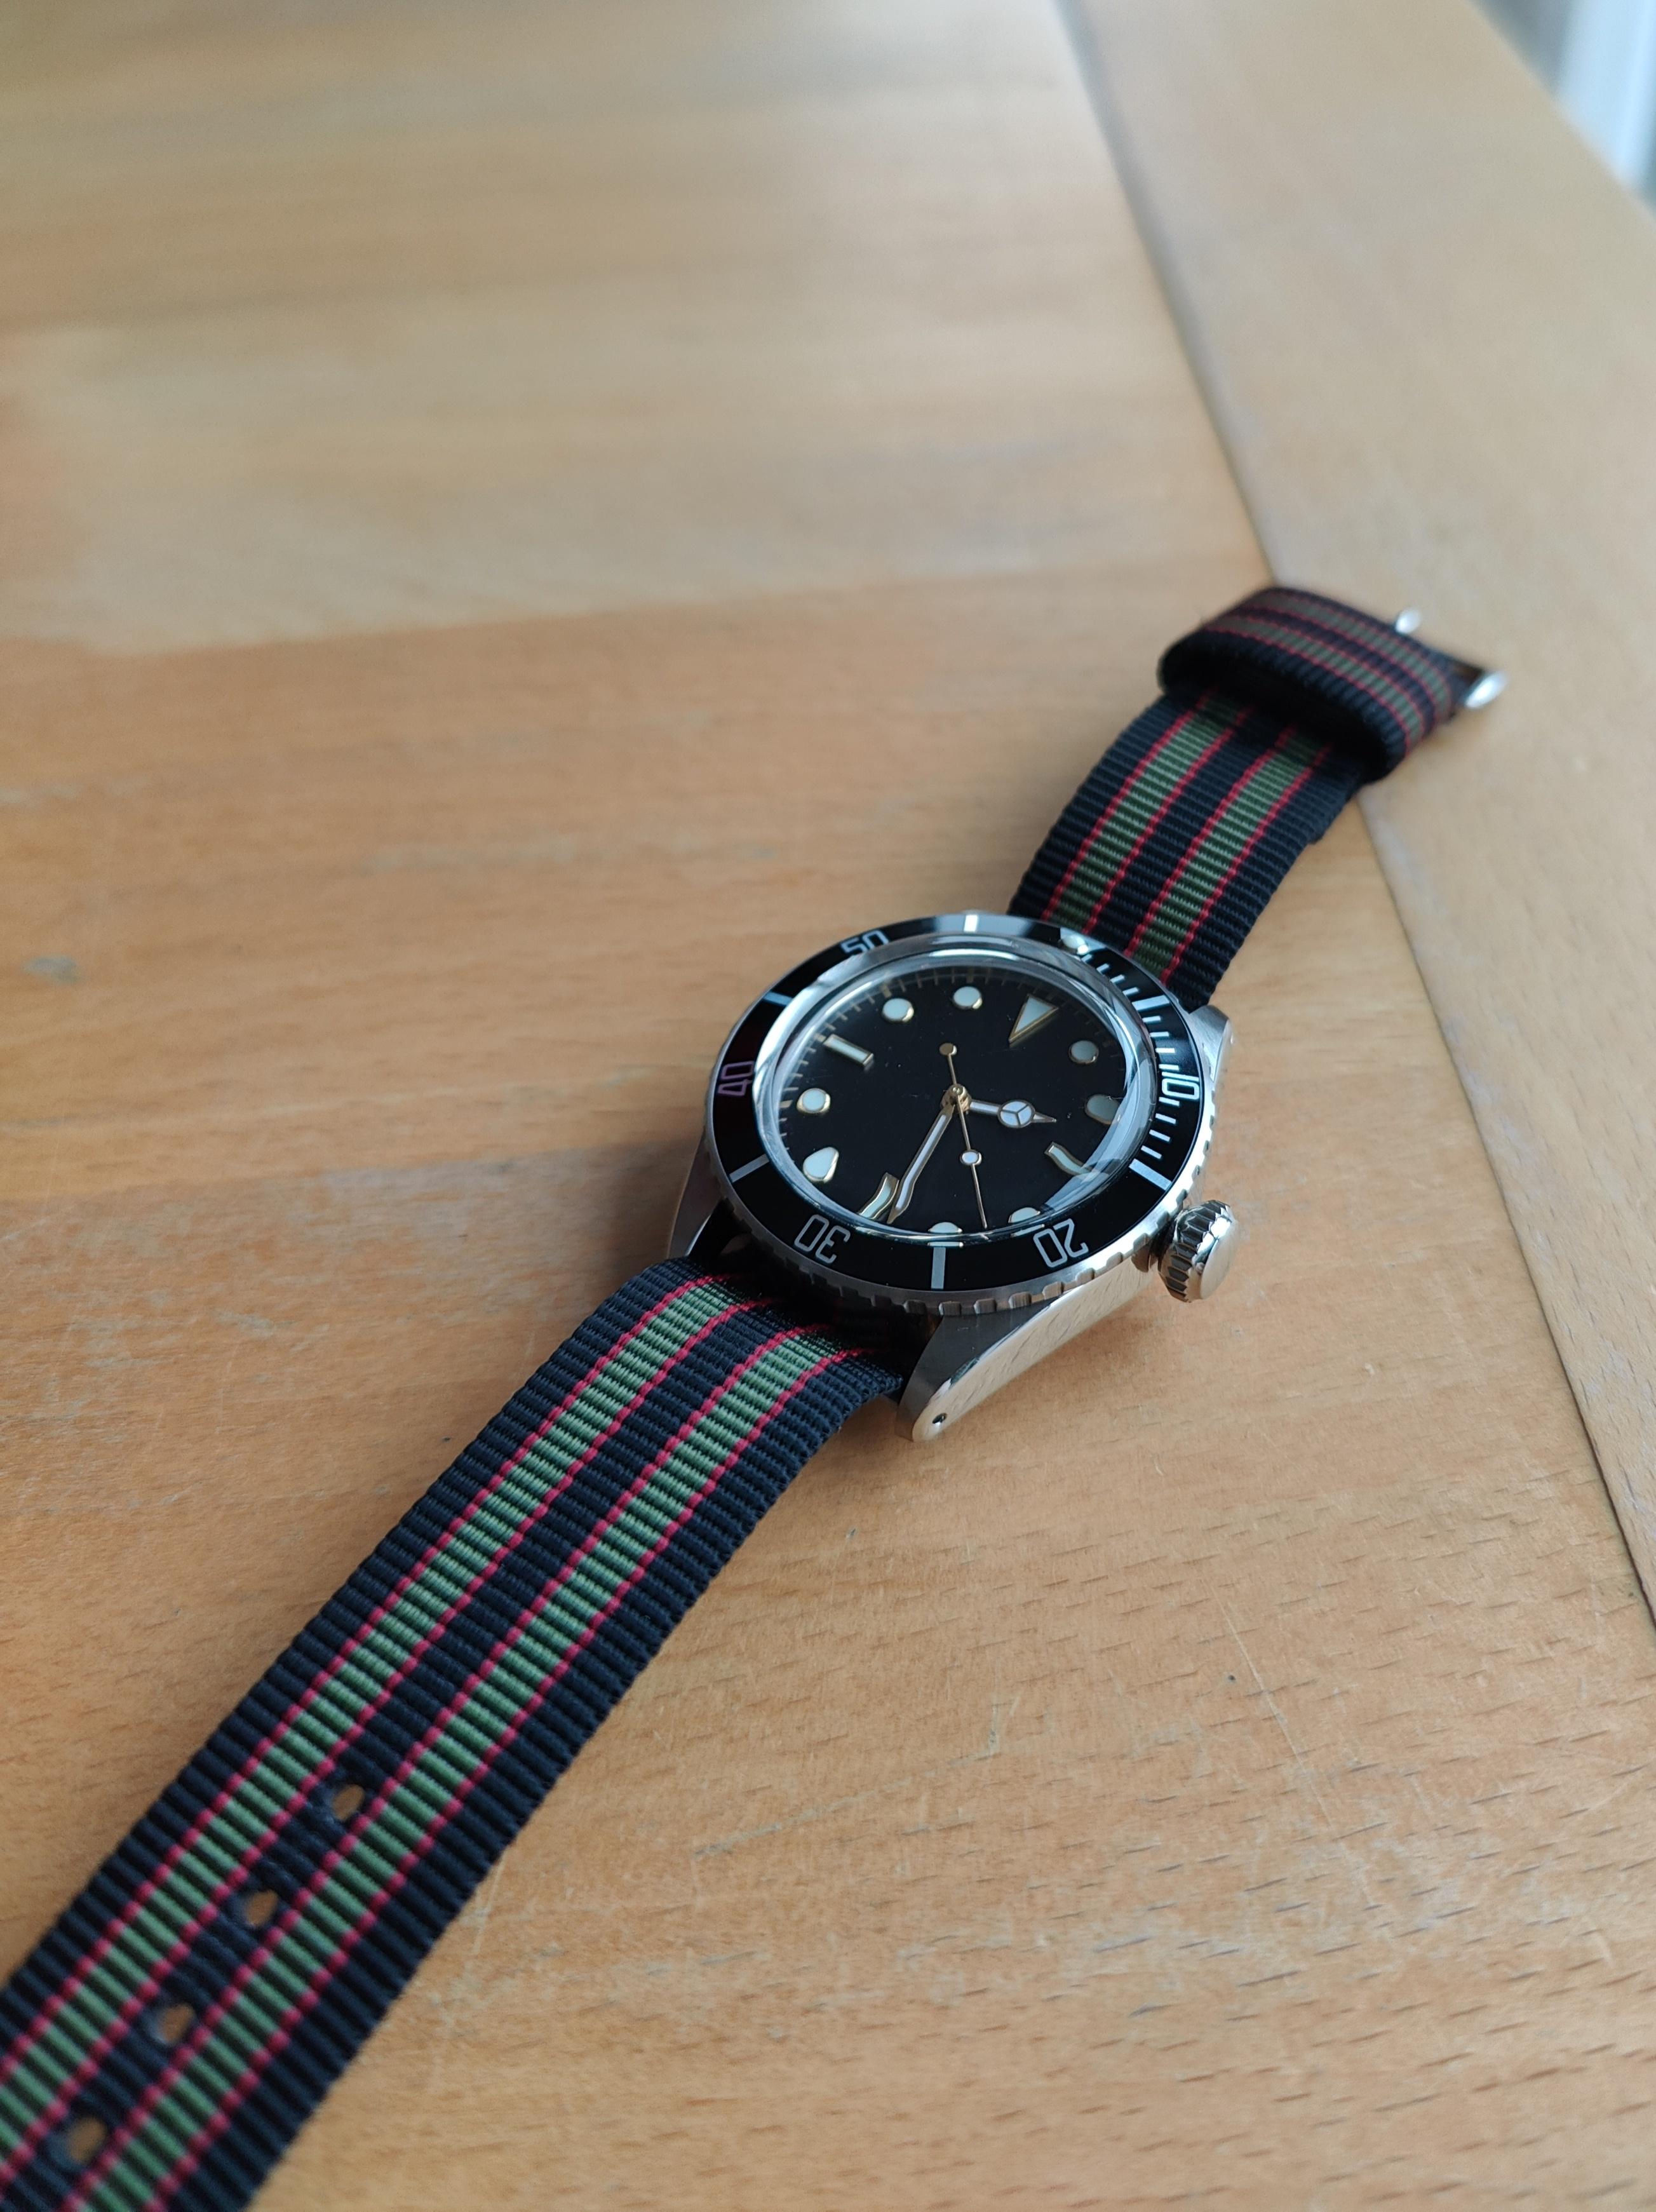 WTS] Rolex 6538 Submariner Homage, Seiko NH38 Based. Made to Order, Brand  New. | WatchCharts